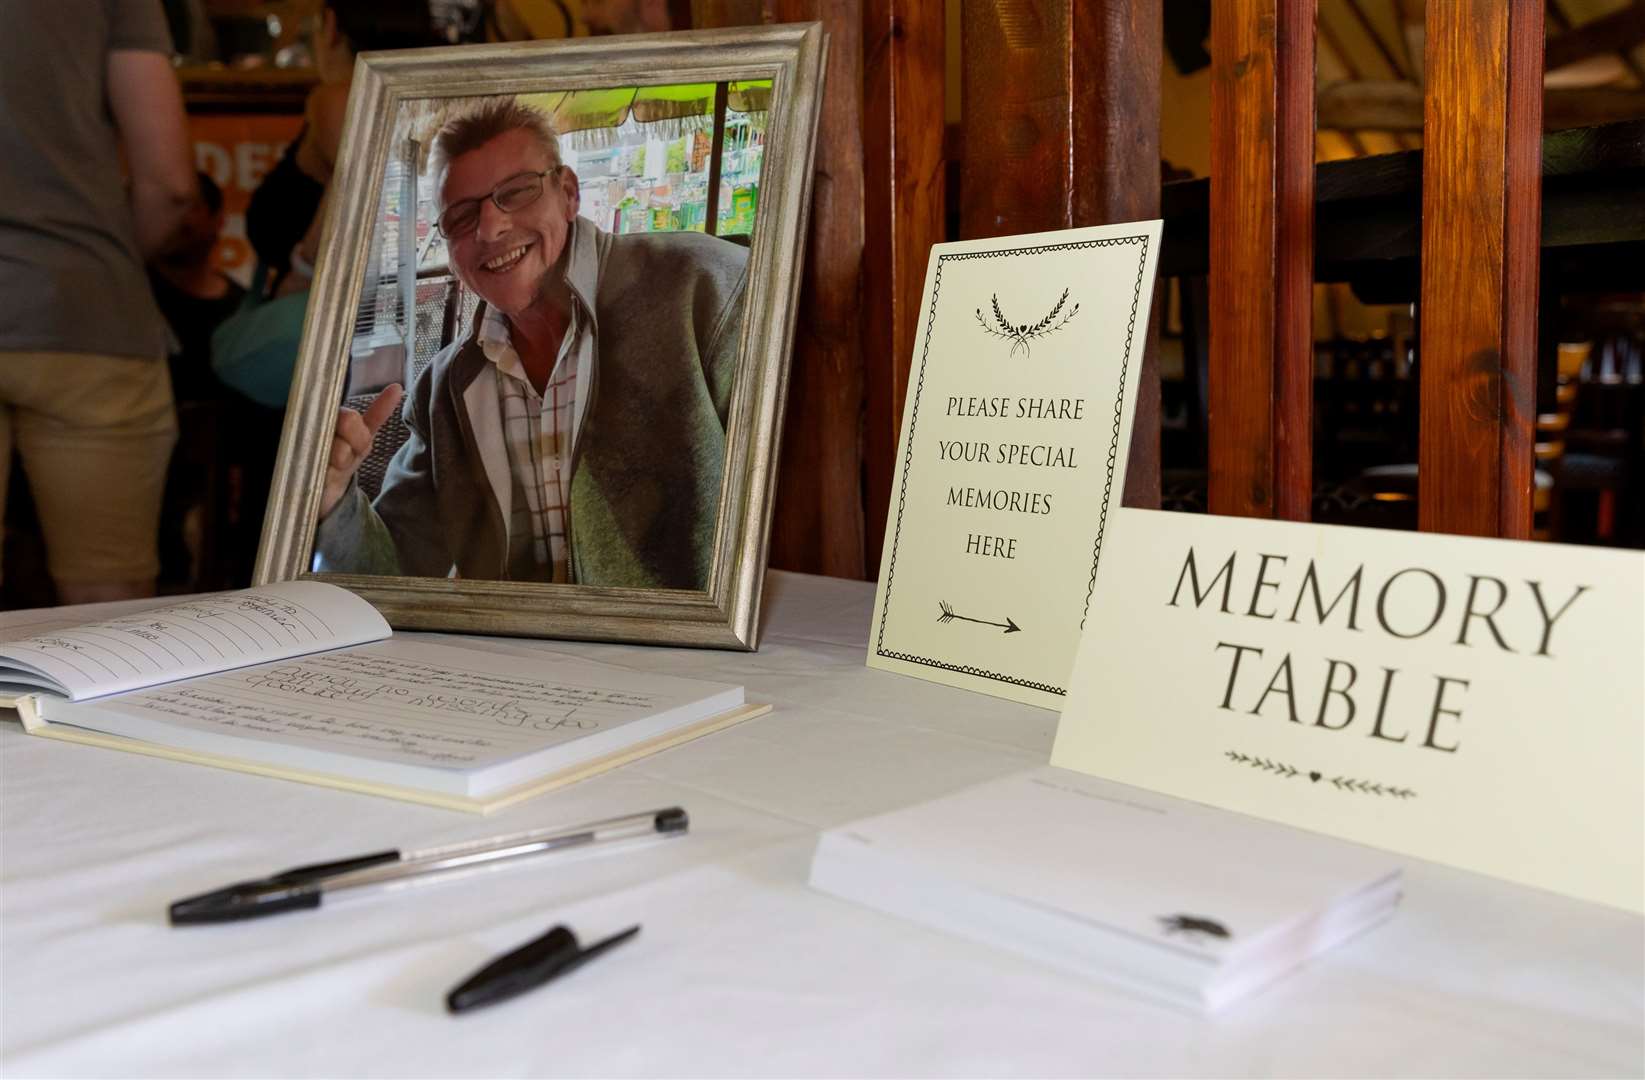 A memory table was set up for the celebration of his life. Picture: Shepherd Neame